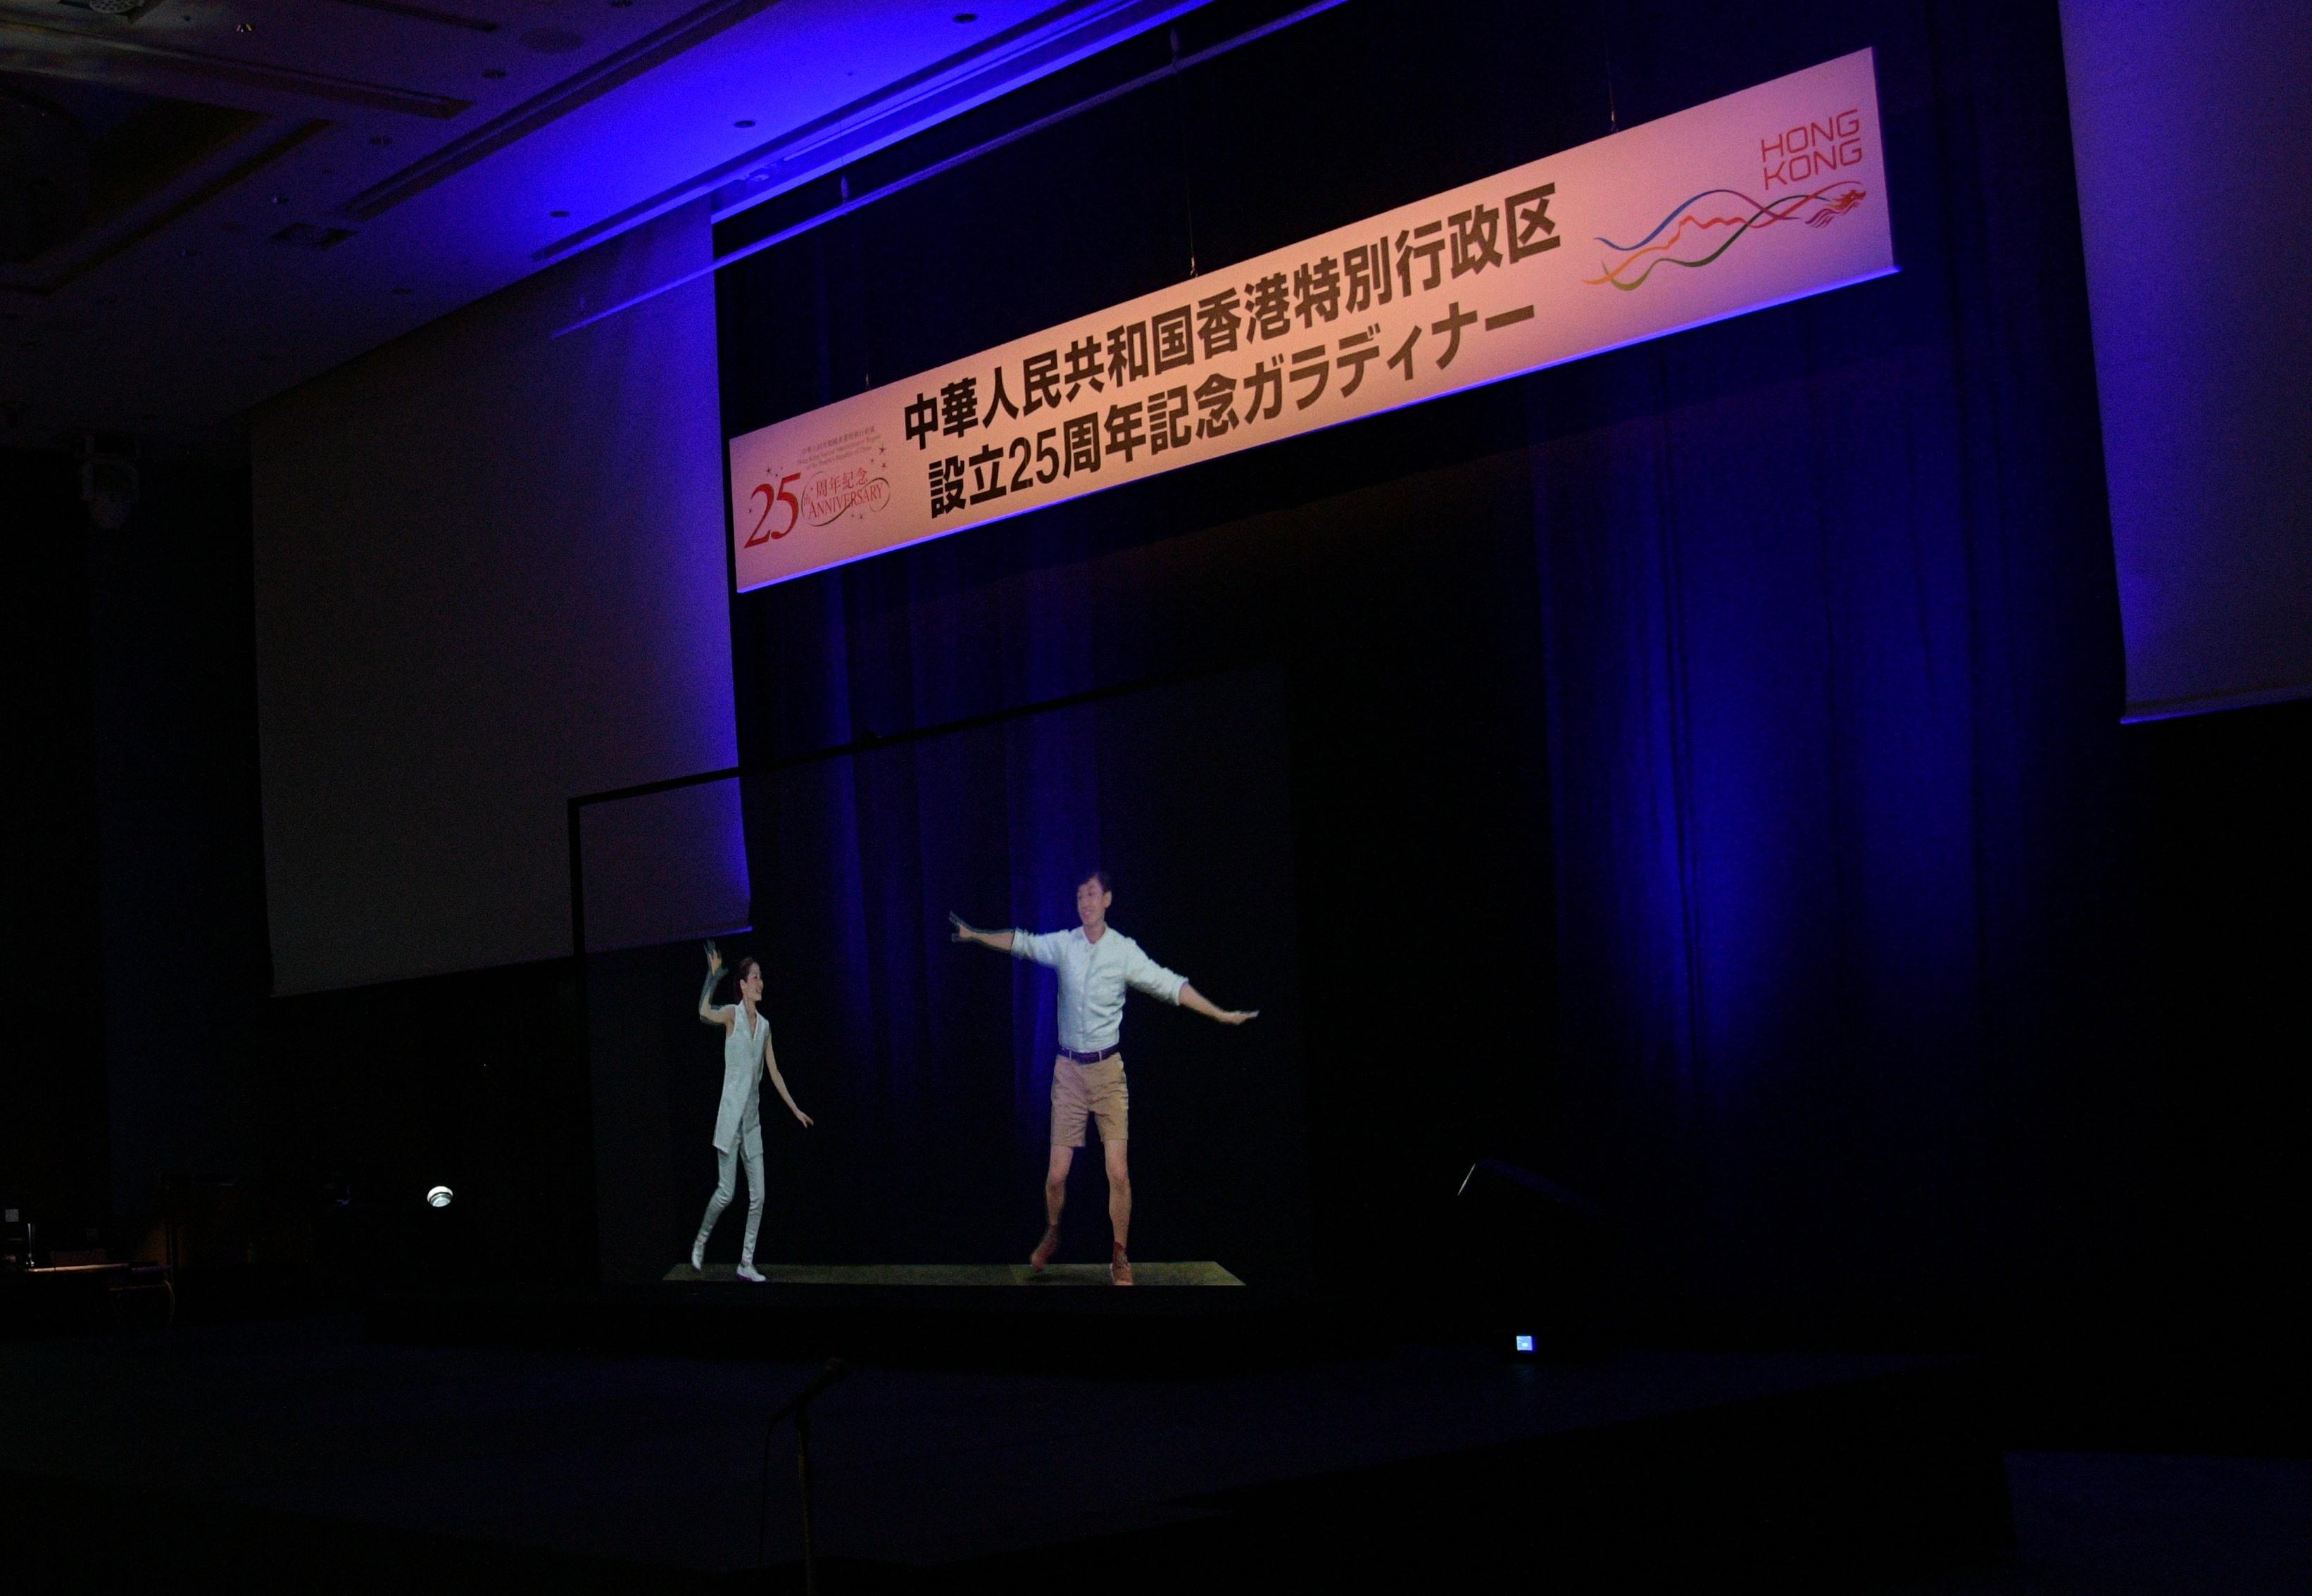 The Hong Kong Economic and Trade Office in Tokyo organised a gala dinner in Tokyo, Japan, today (July 29) to celebrate the 25th anniversary of the establishment of the Hong Kong Special Administrative Region. Through hologram technology, dance company R&T (Rhythm & Tempo) presented a live tap dance performance from Hong Kong for the gala dinner.